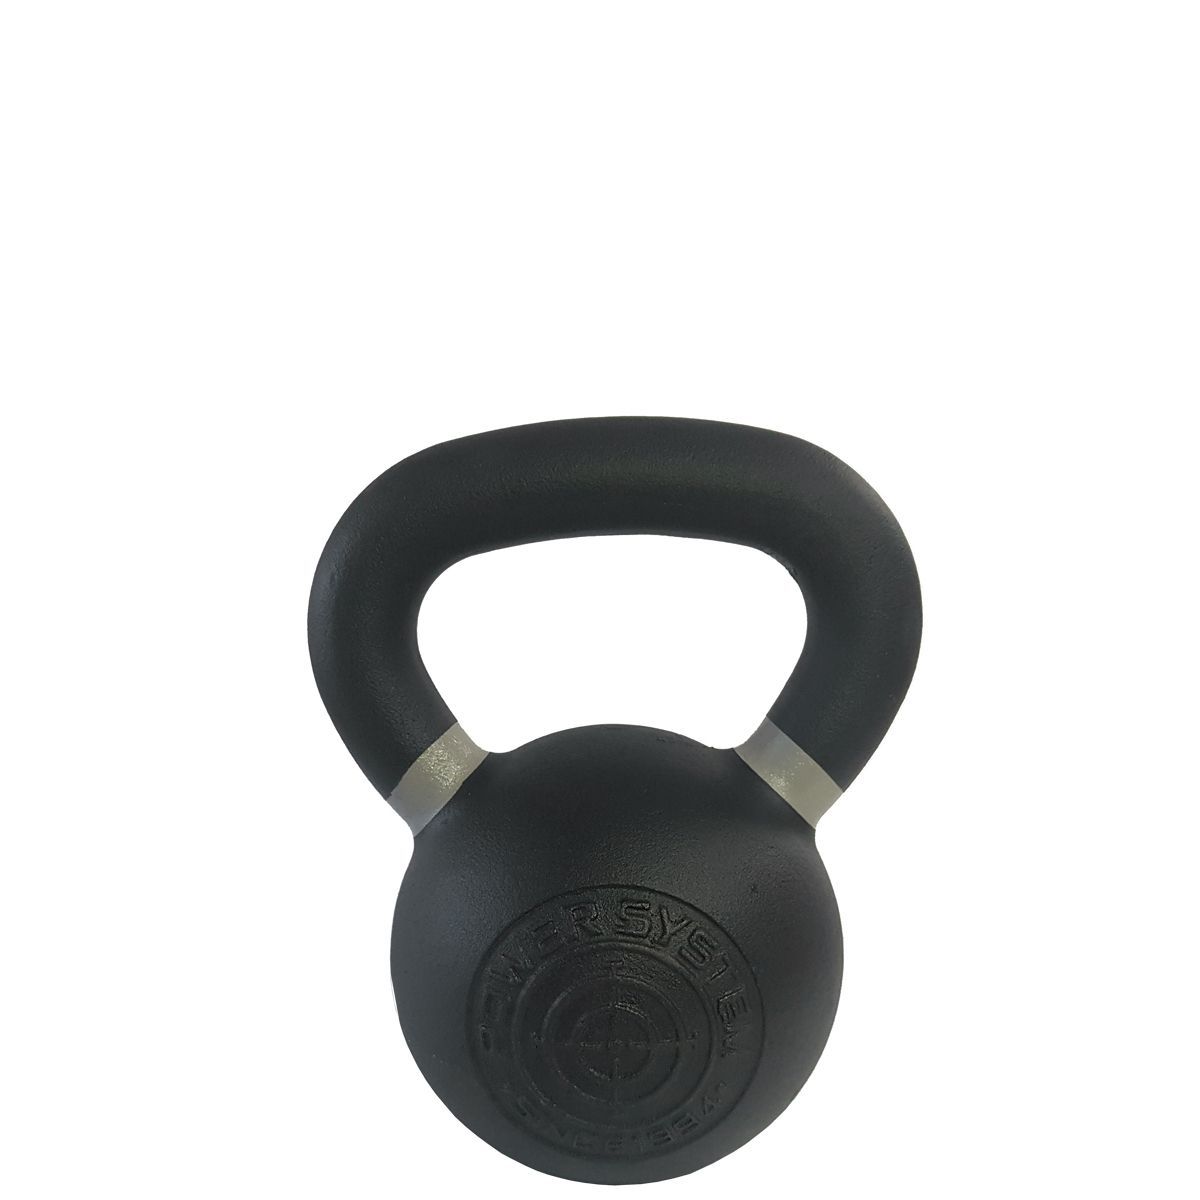 POWER SYSTEM - EXTREME STRENGTH KETTLEBELL PS4104 - 16 KG